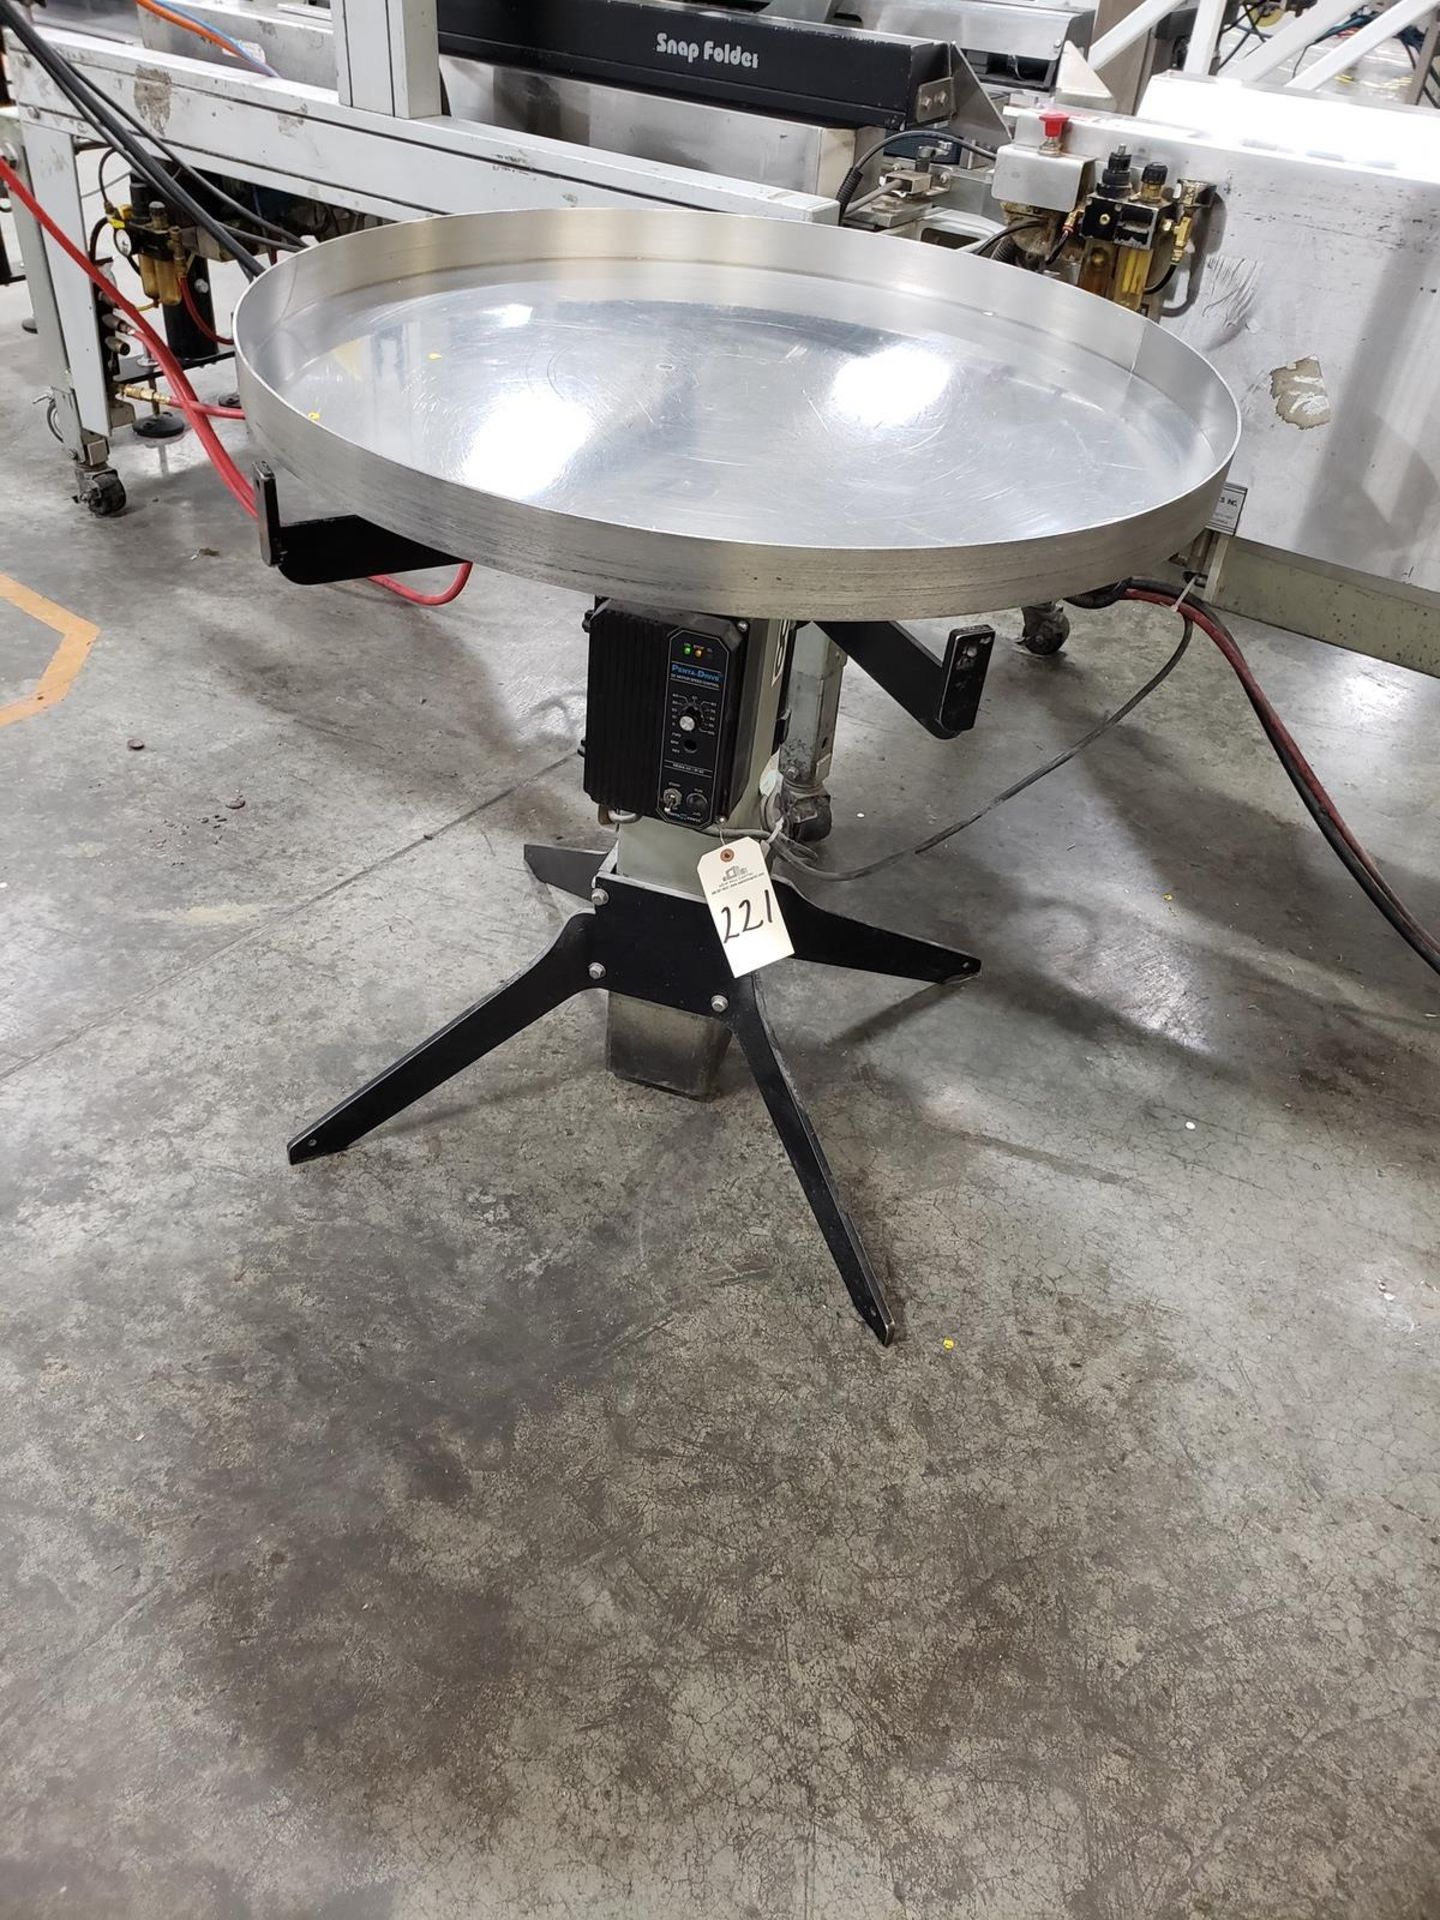 Belcor Model A32 32"D Rotary Accumulation Table, S/N A32-010006, Asset #8, (2001 | Rig Fee: $50